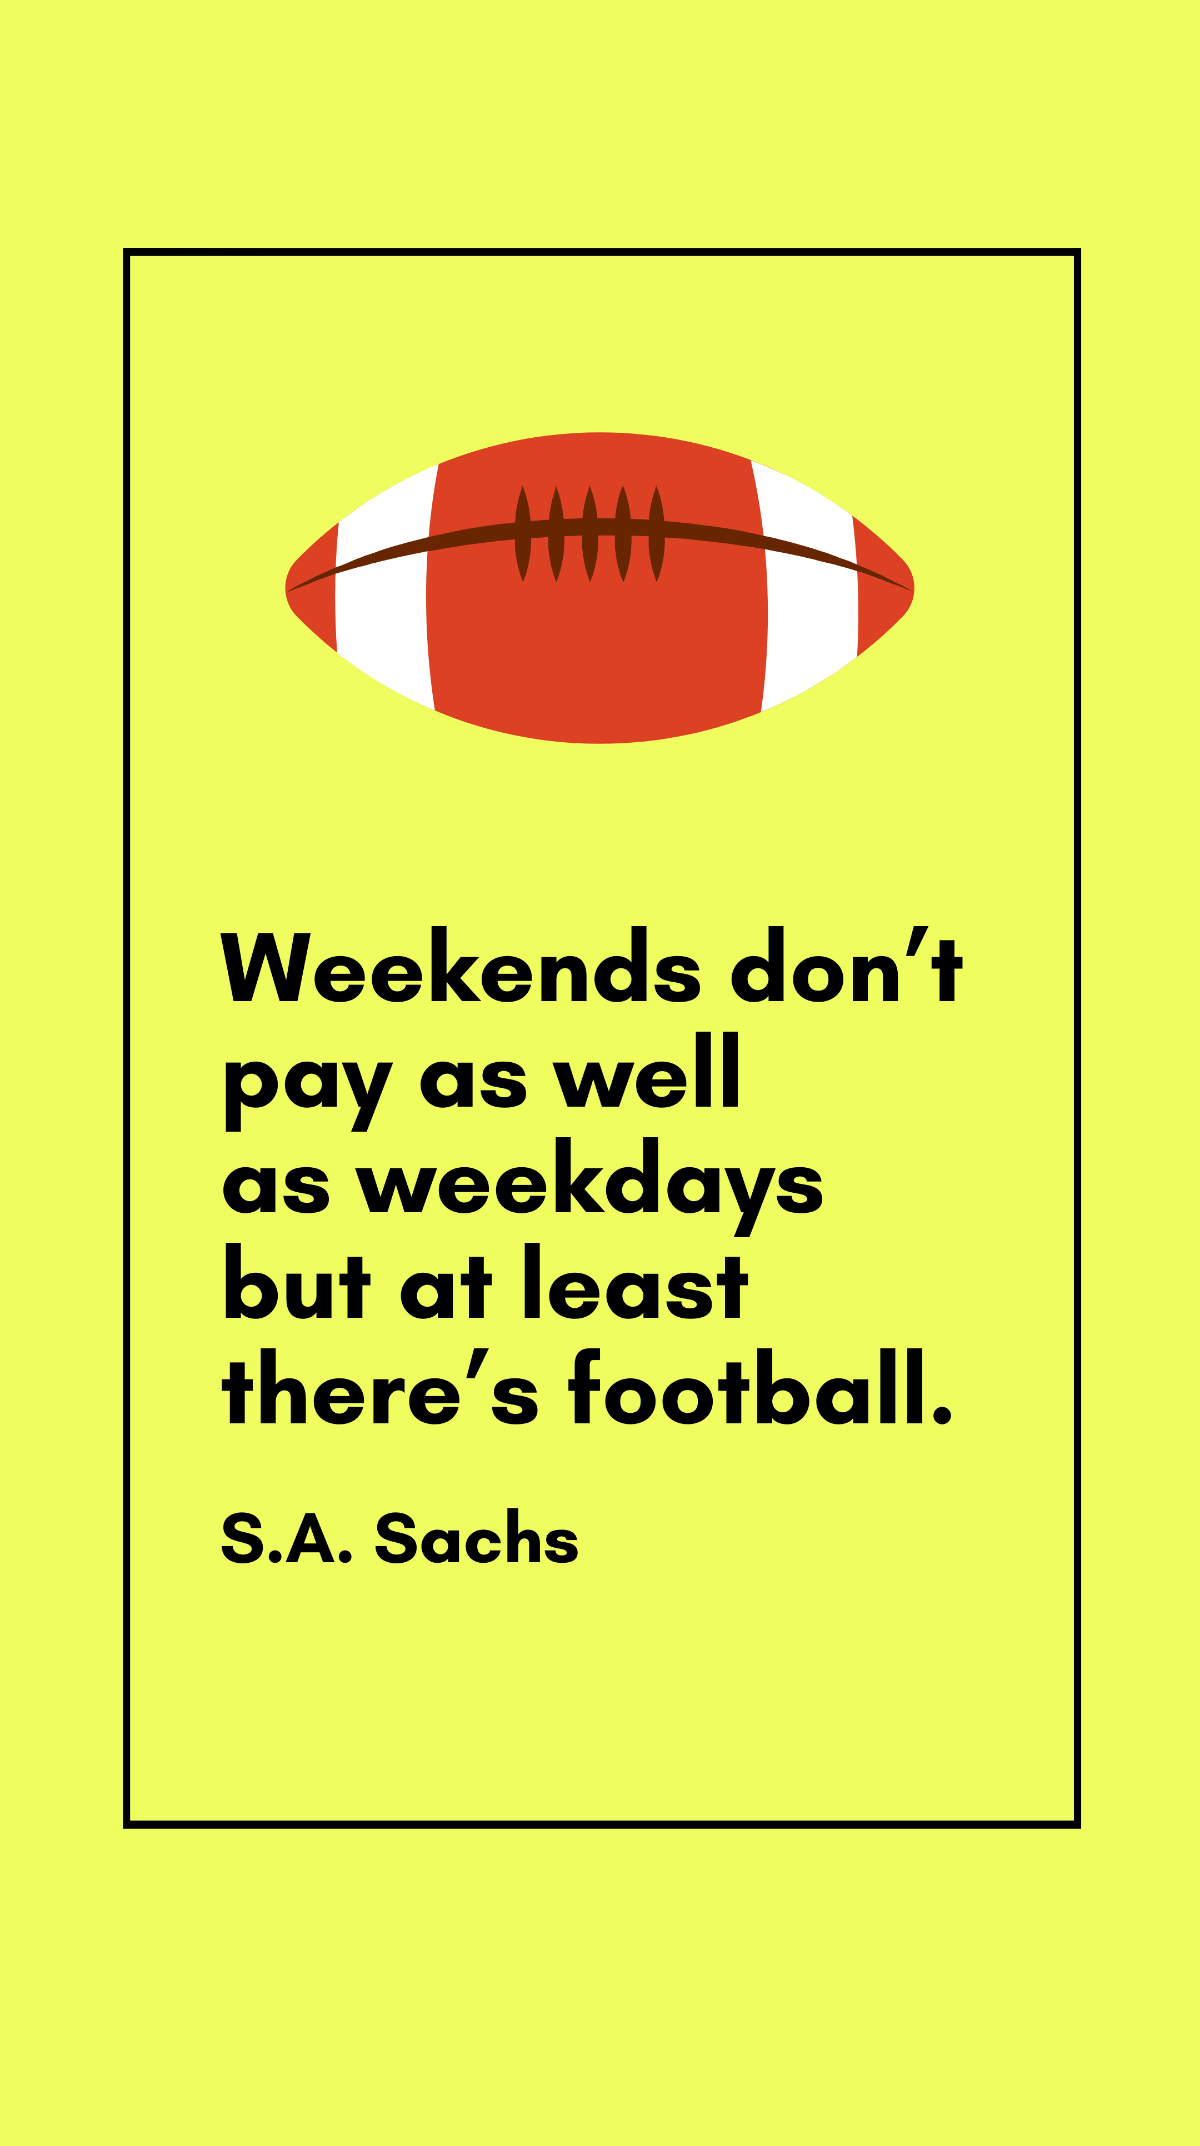 S.A. Sachs - Weekends don’t pay as well as weekdays but at least there’s football.  Template